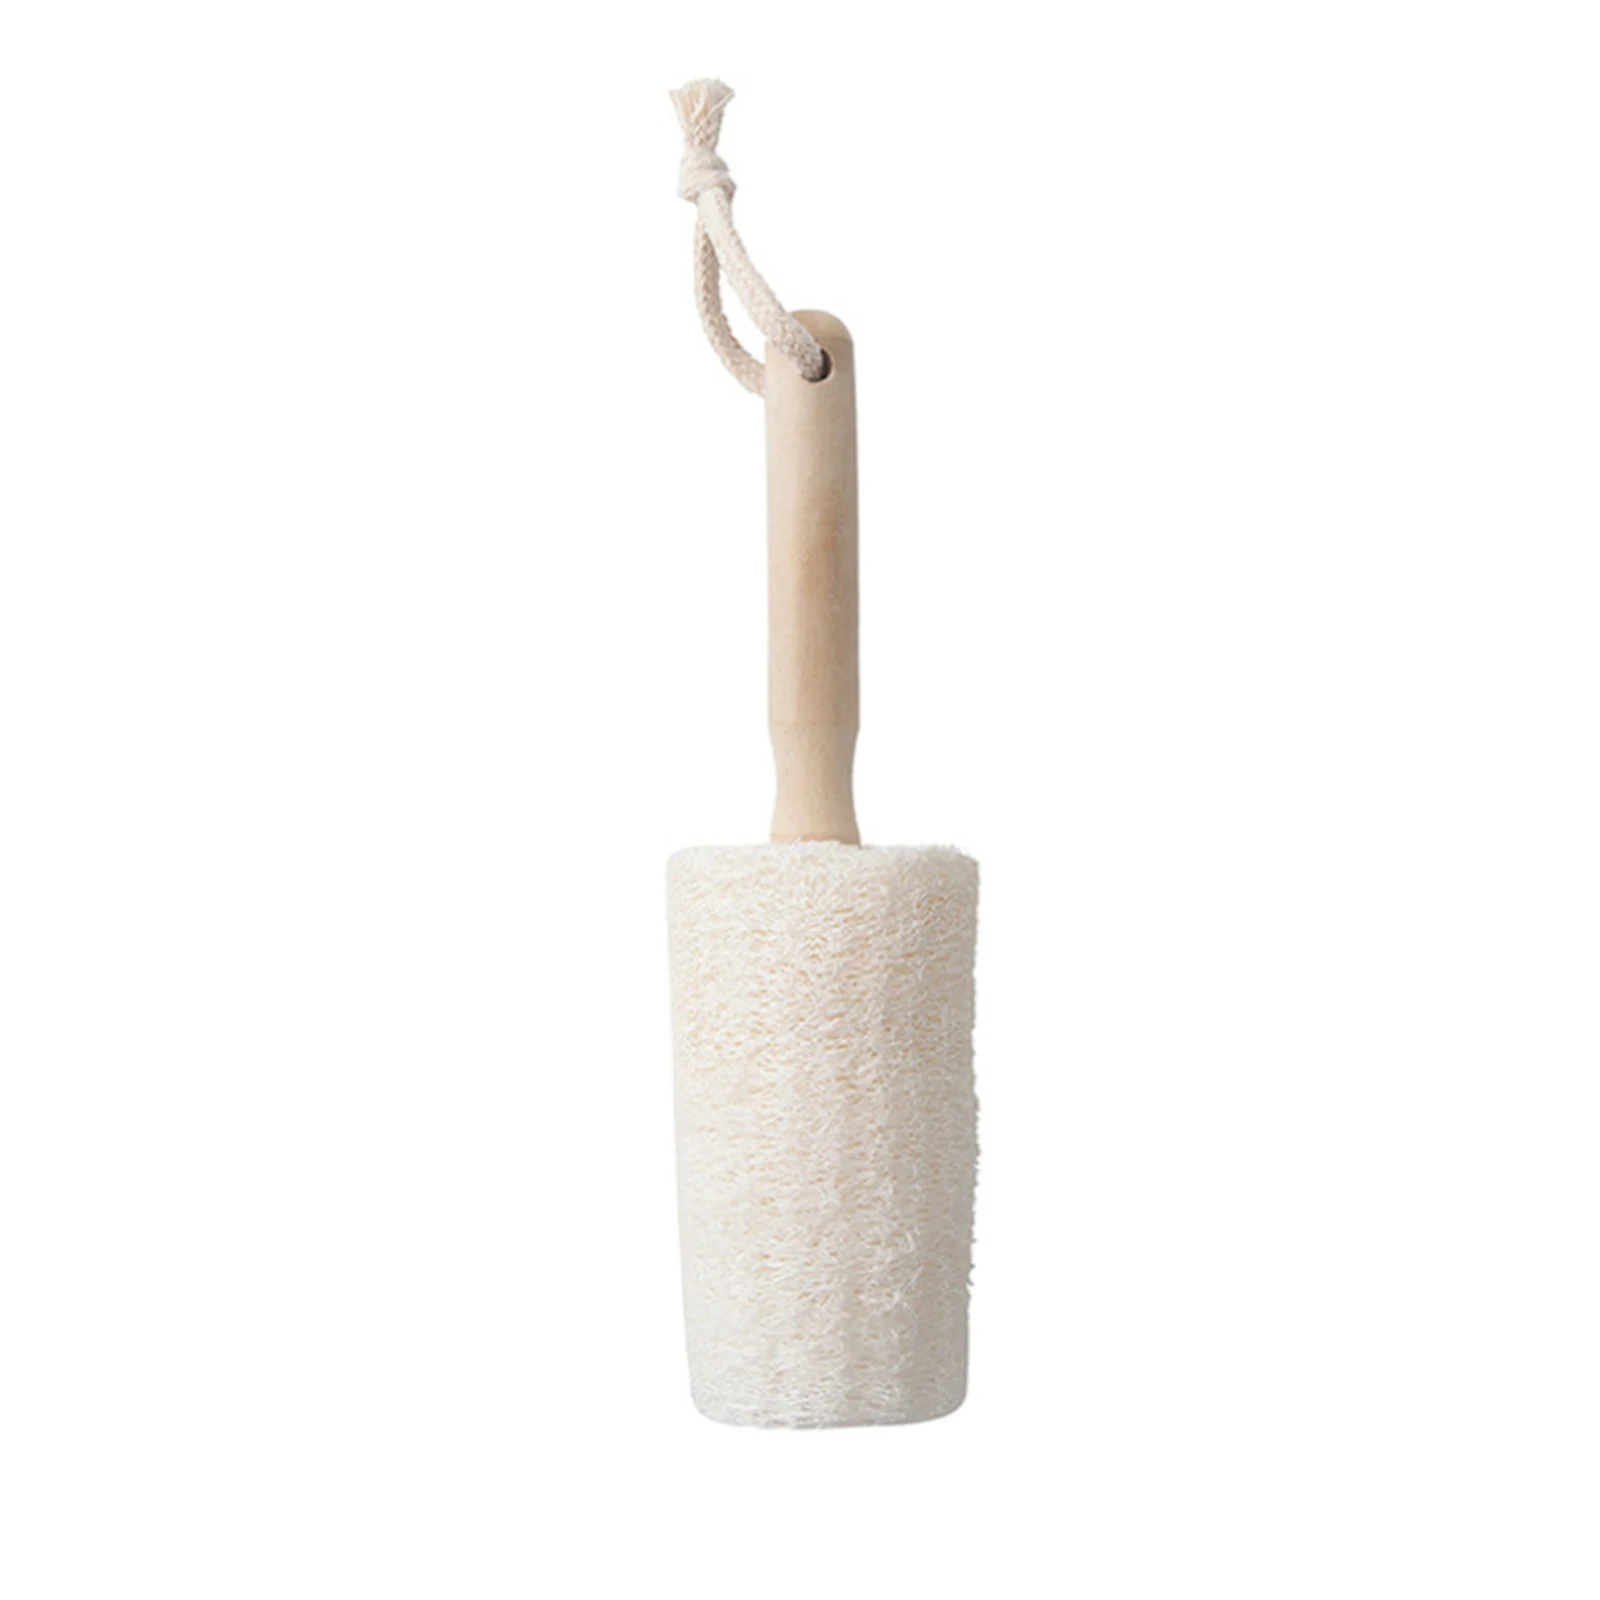 

Eco-friendly Loofah Dishwashing Brush Wooden Handle Can Be Hung Cleaning Brushes for All Types of Non-stick Cookware Pots Plates